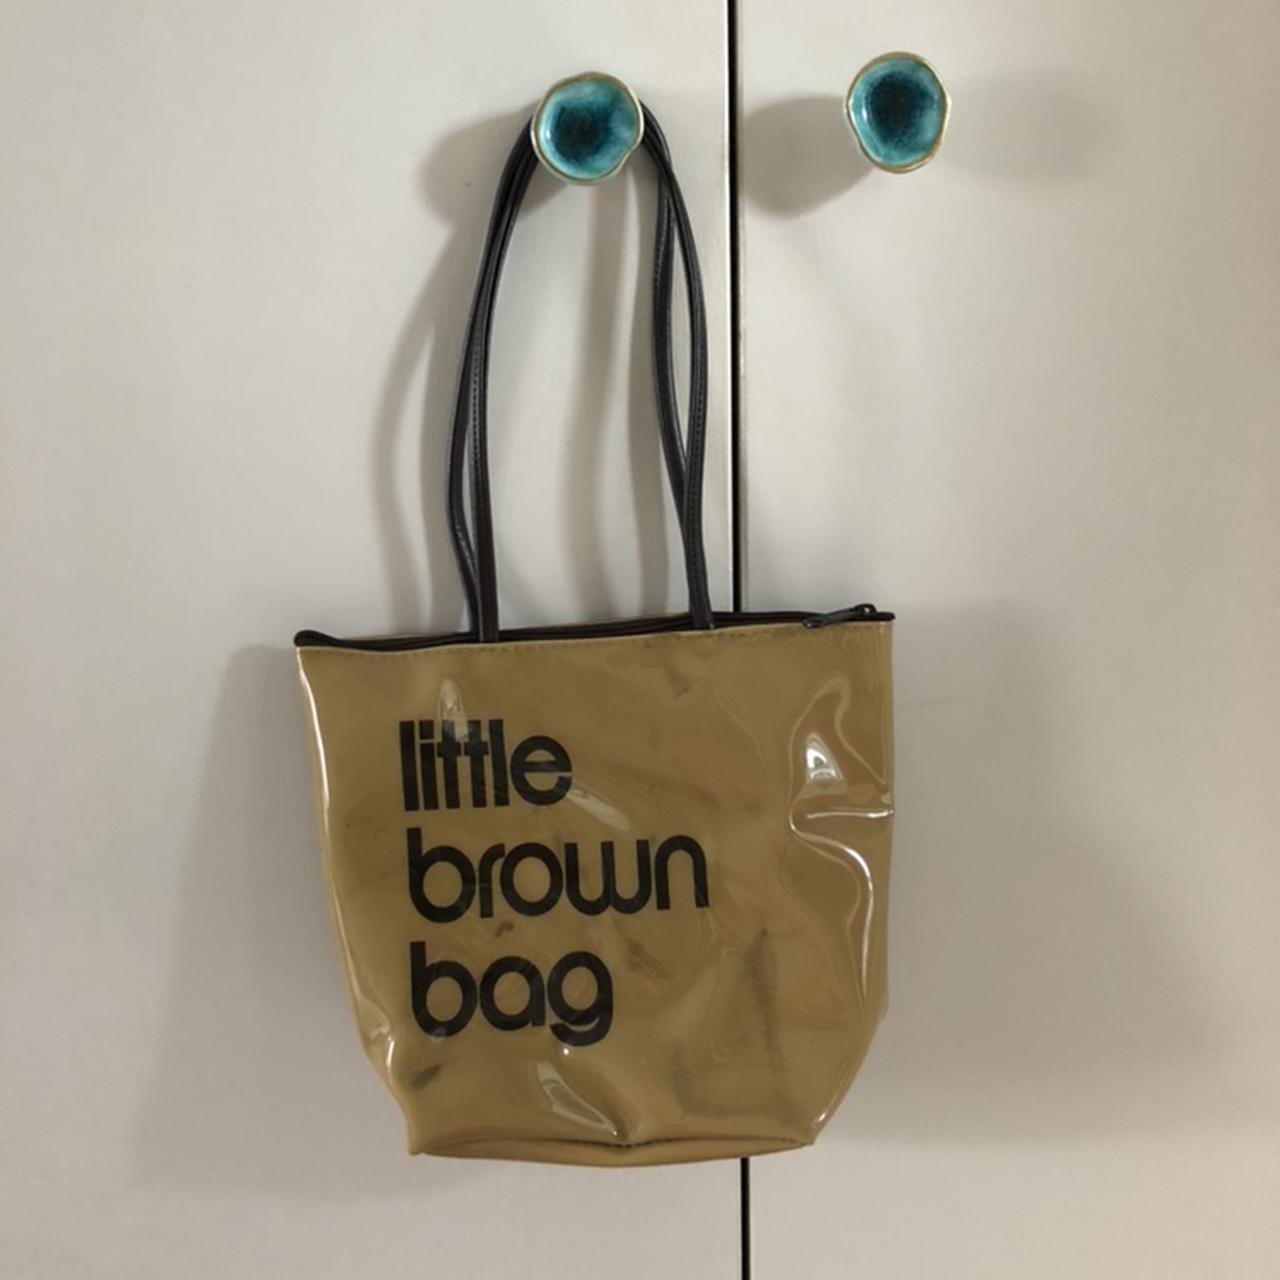 places to find a cheap bloomingdales little brown bag｜TikTok Search